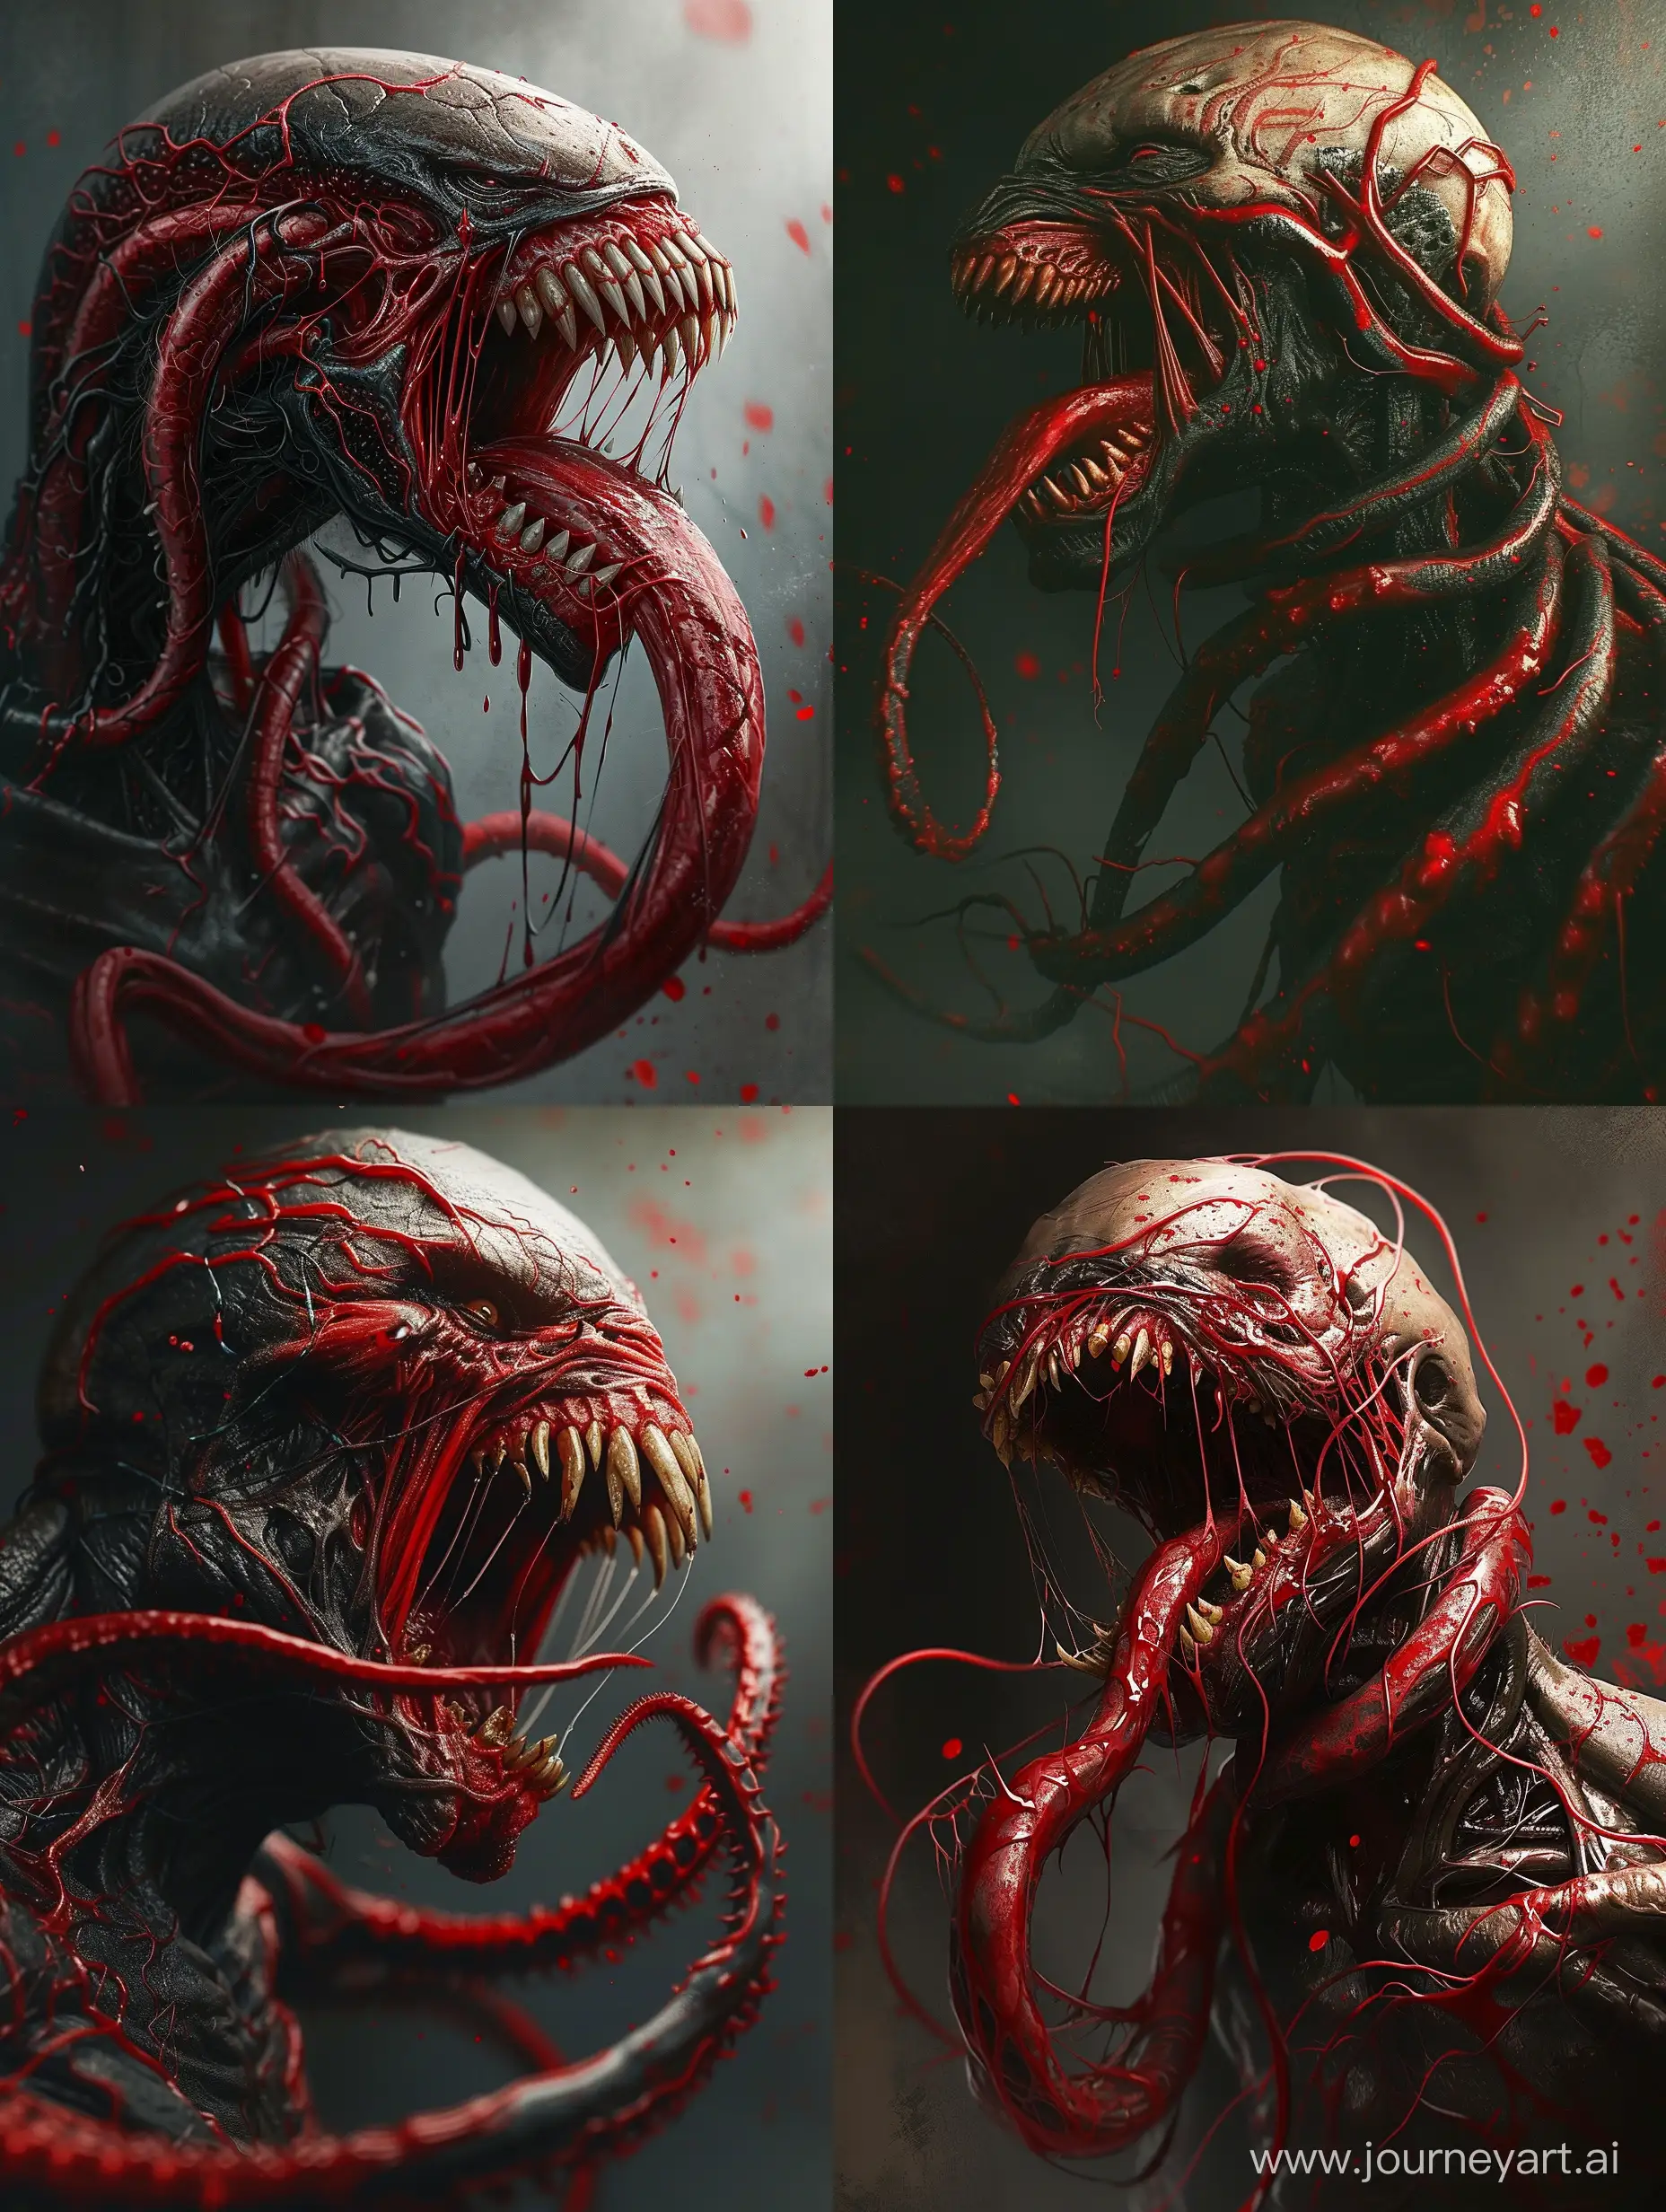 The image features a close-up of a monster with red and black skin, long teeth, and a large, elongated red tongue. It has red blood vessels scattered across its skin and is shown in a dark, muted color palette. The monster appears to be contorting its face in a menacing manner.